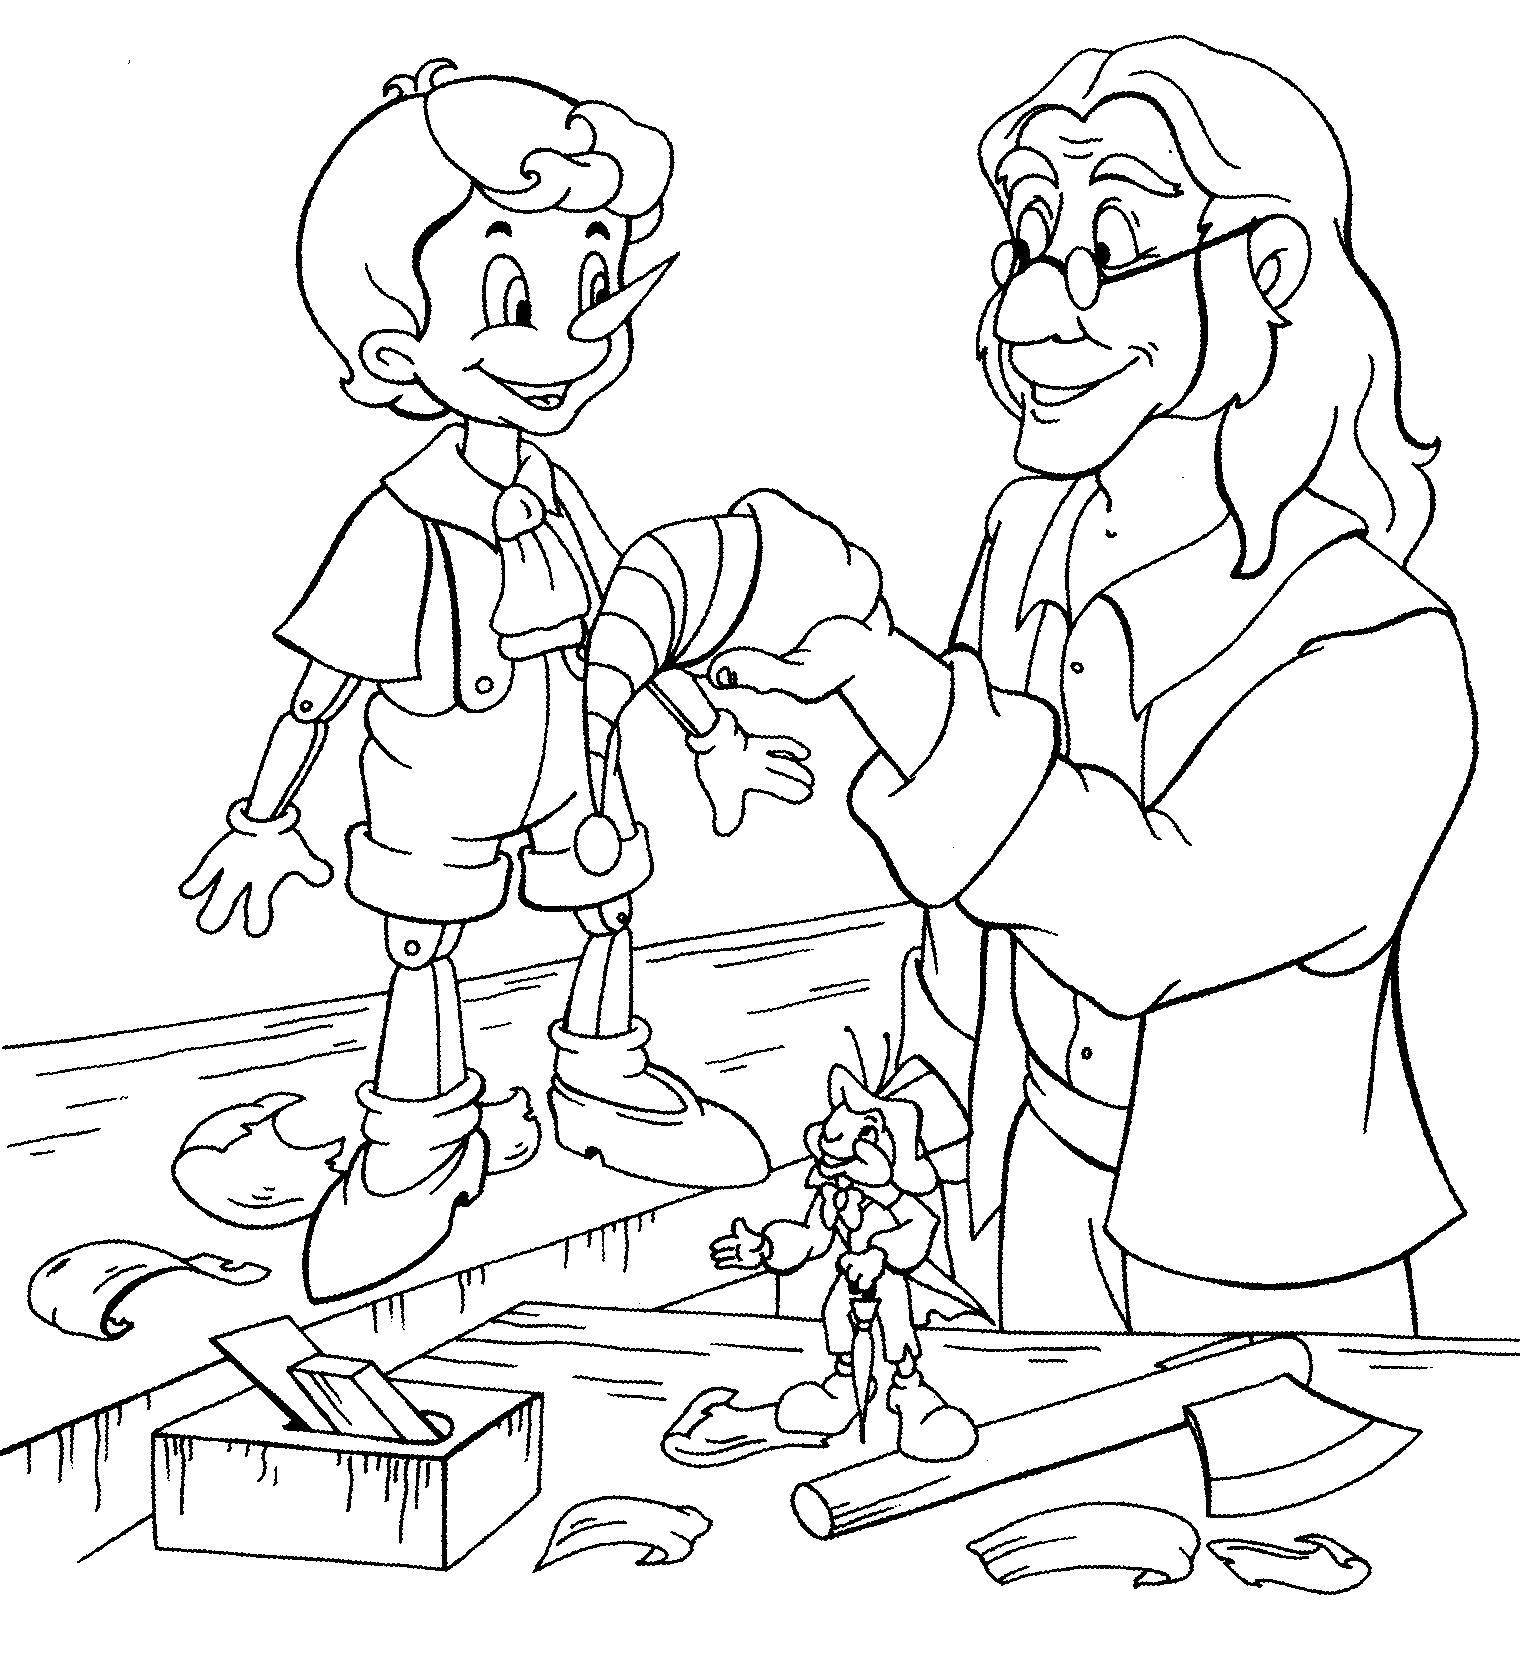 Coloring Pinocchio Carlo and dad. Category Golden key. Tags:  Pinocchio , Golden Key, cartoon.